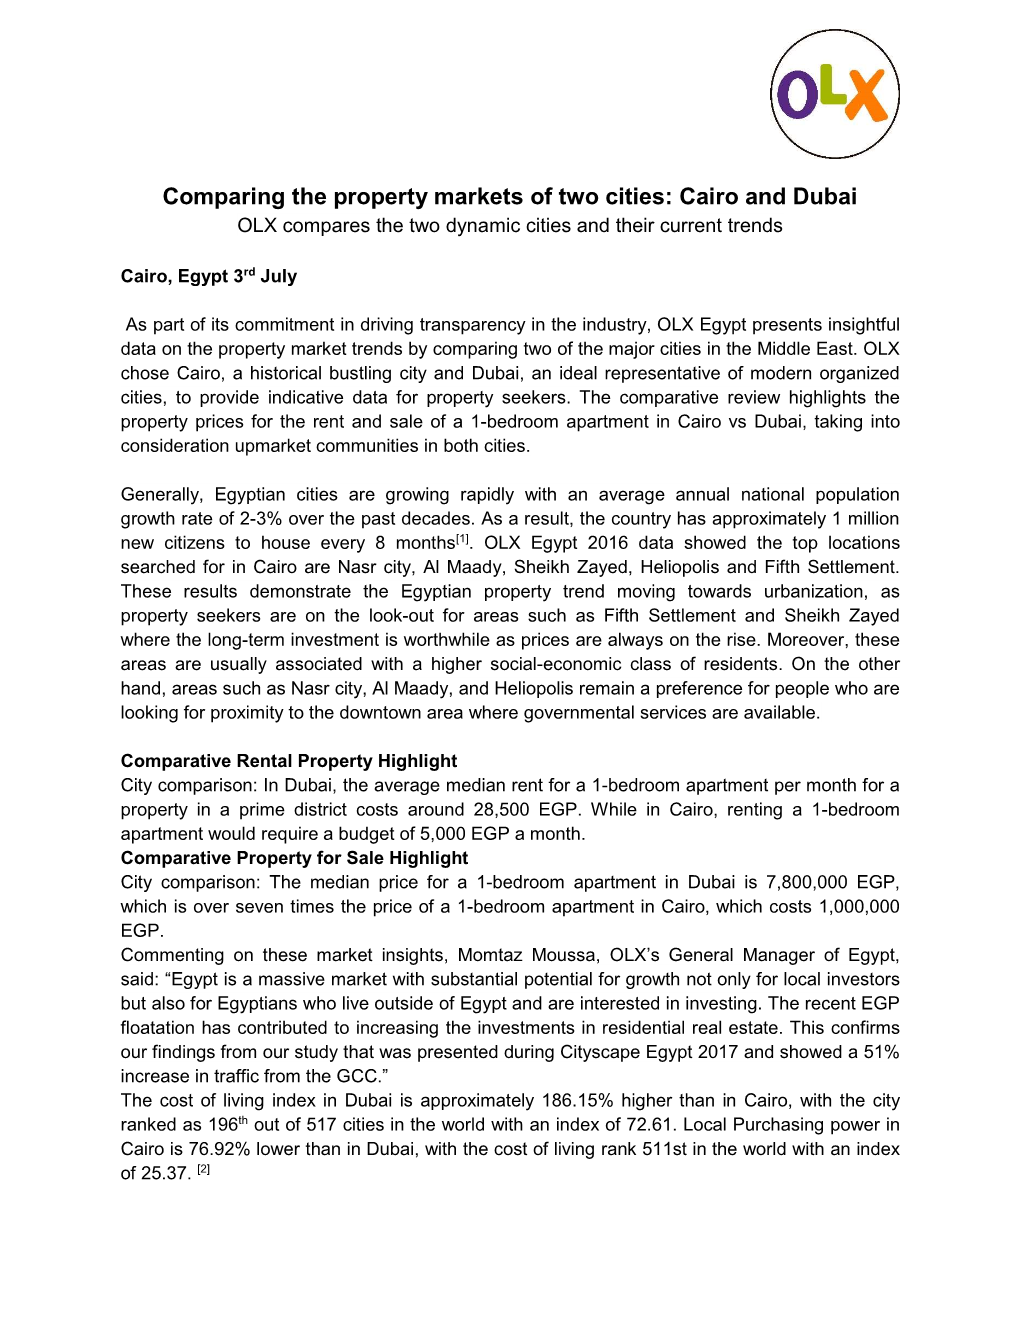 Comparing the Property Markets of Two Cities: Cairo and Dubai OLX Compares the Two Dynamic Cities and Their Current Trends